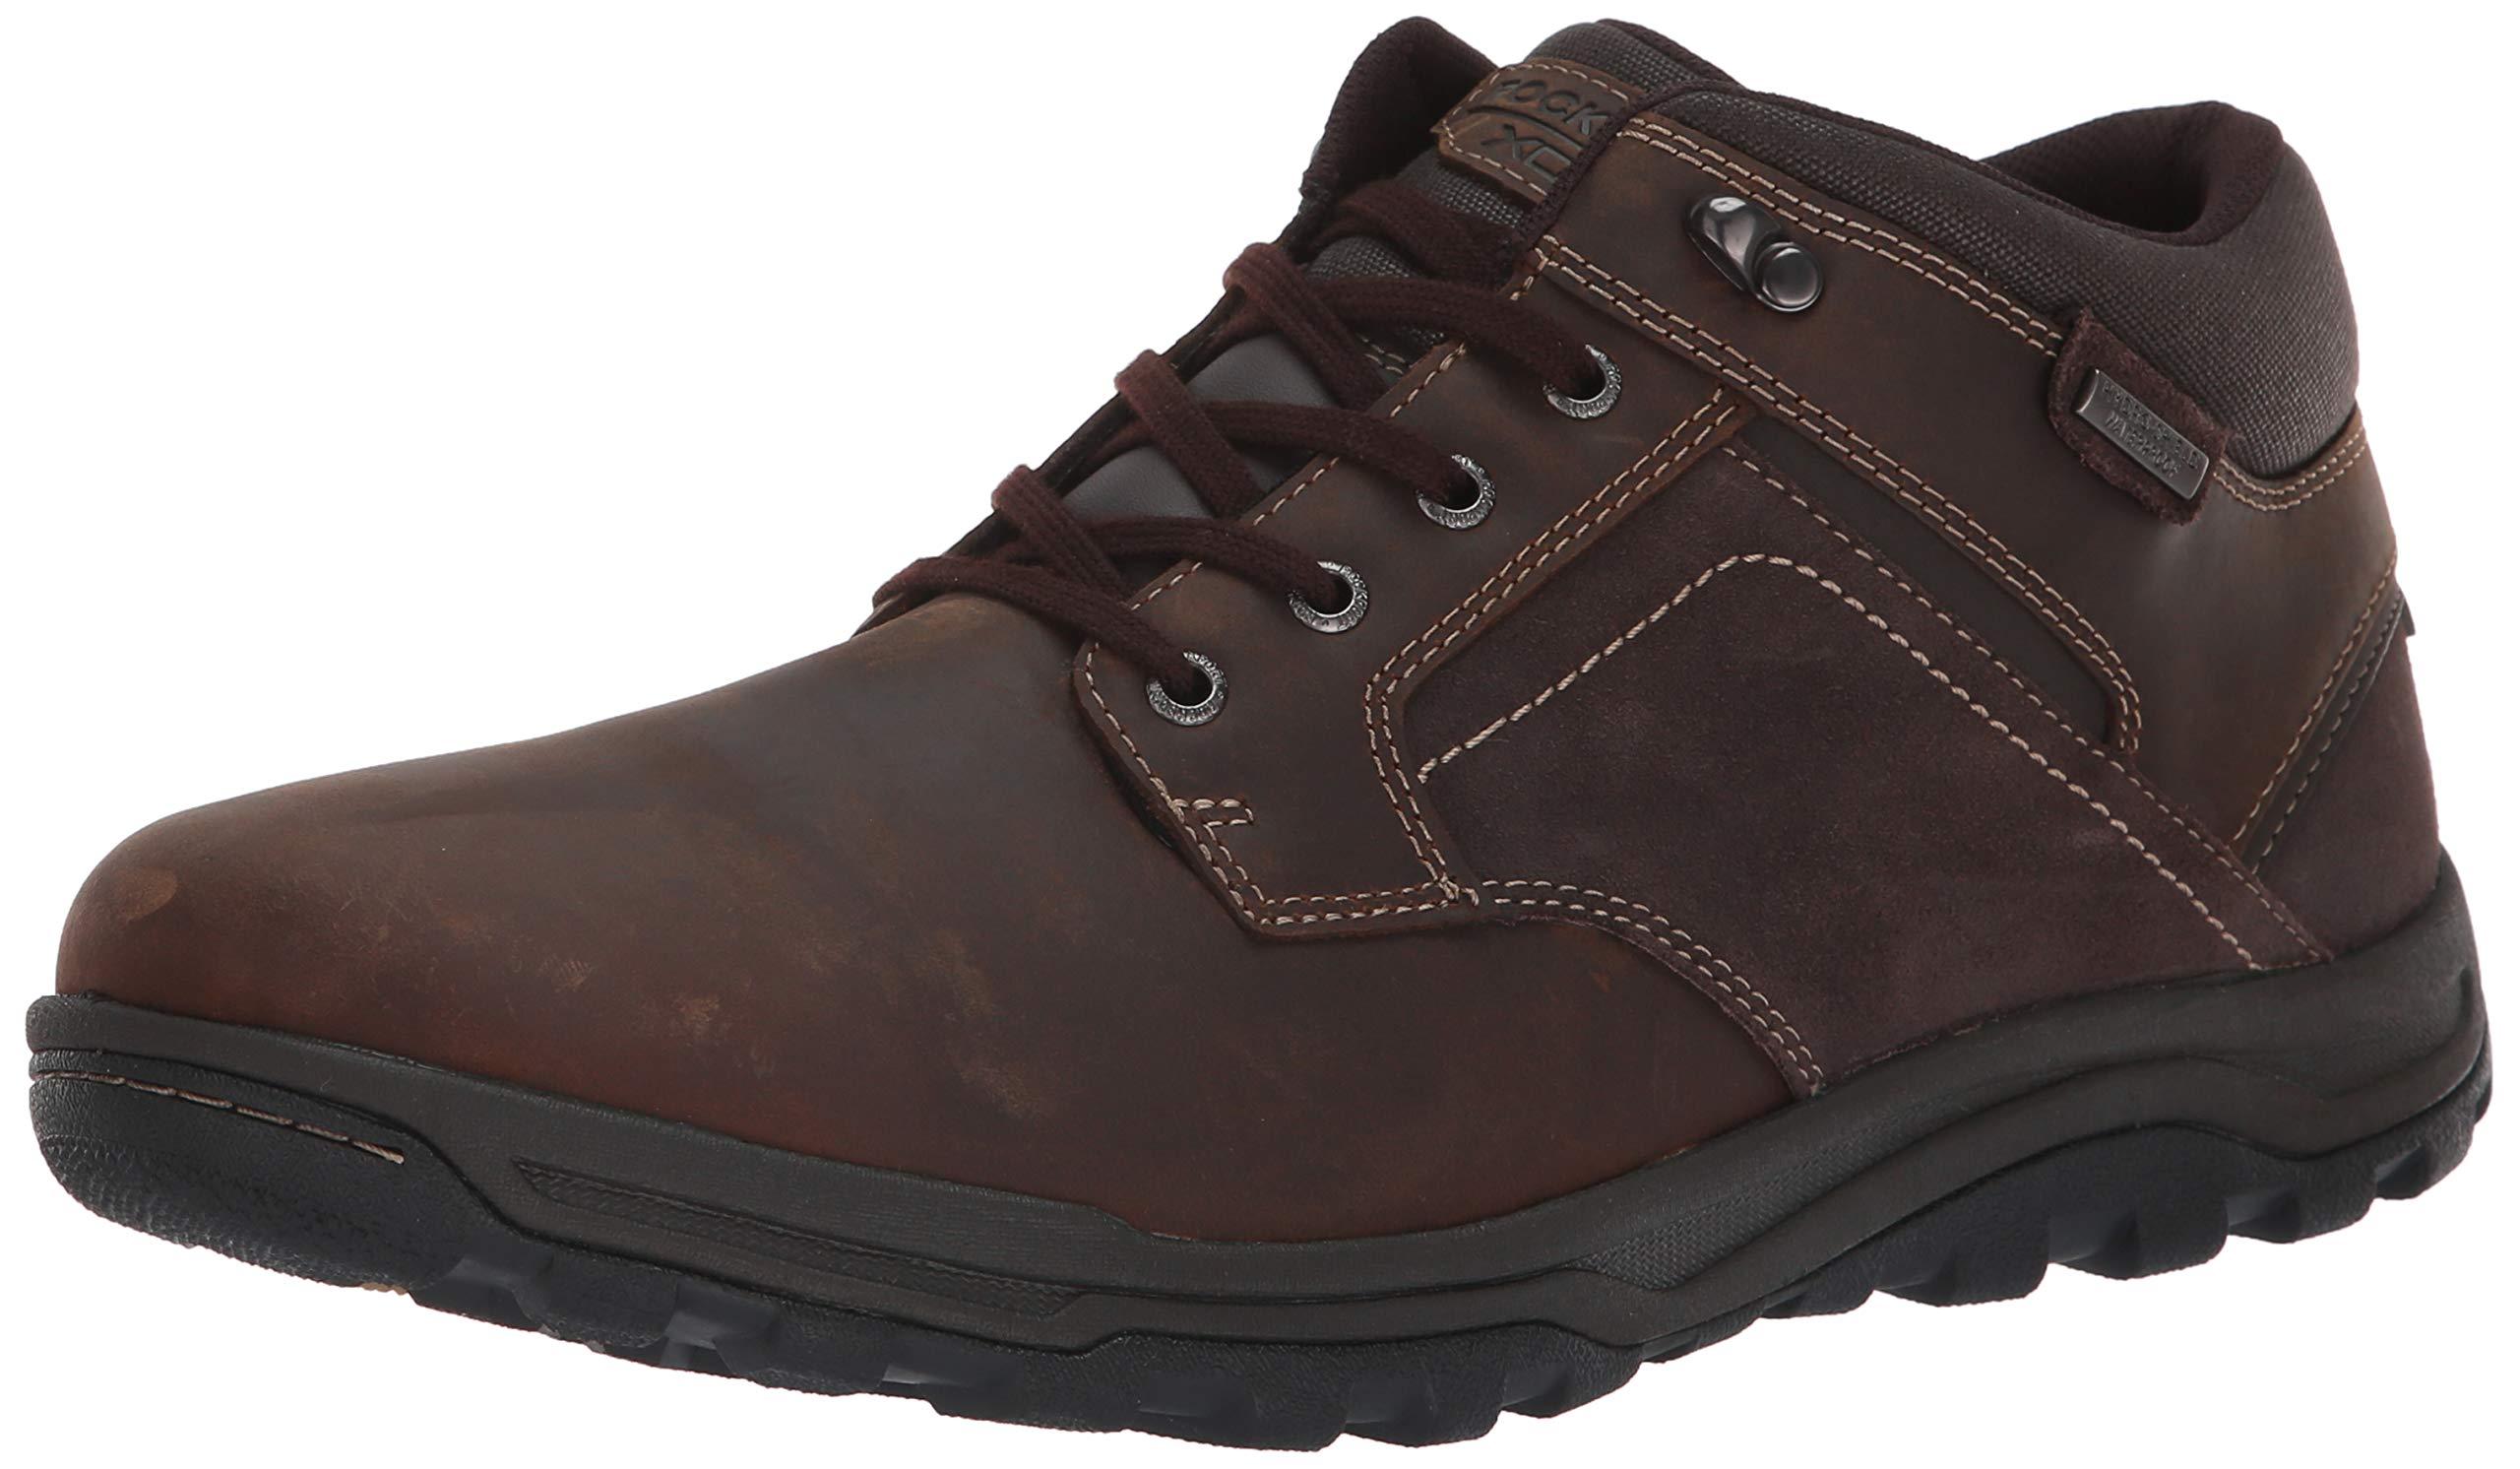 Rockport Lace Harlee Chukka Boot in Brown for Men - Lyst